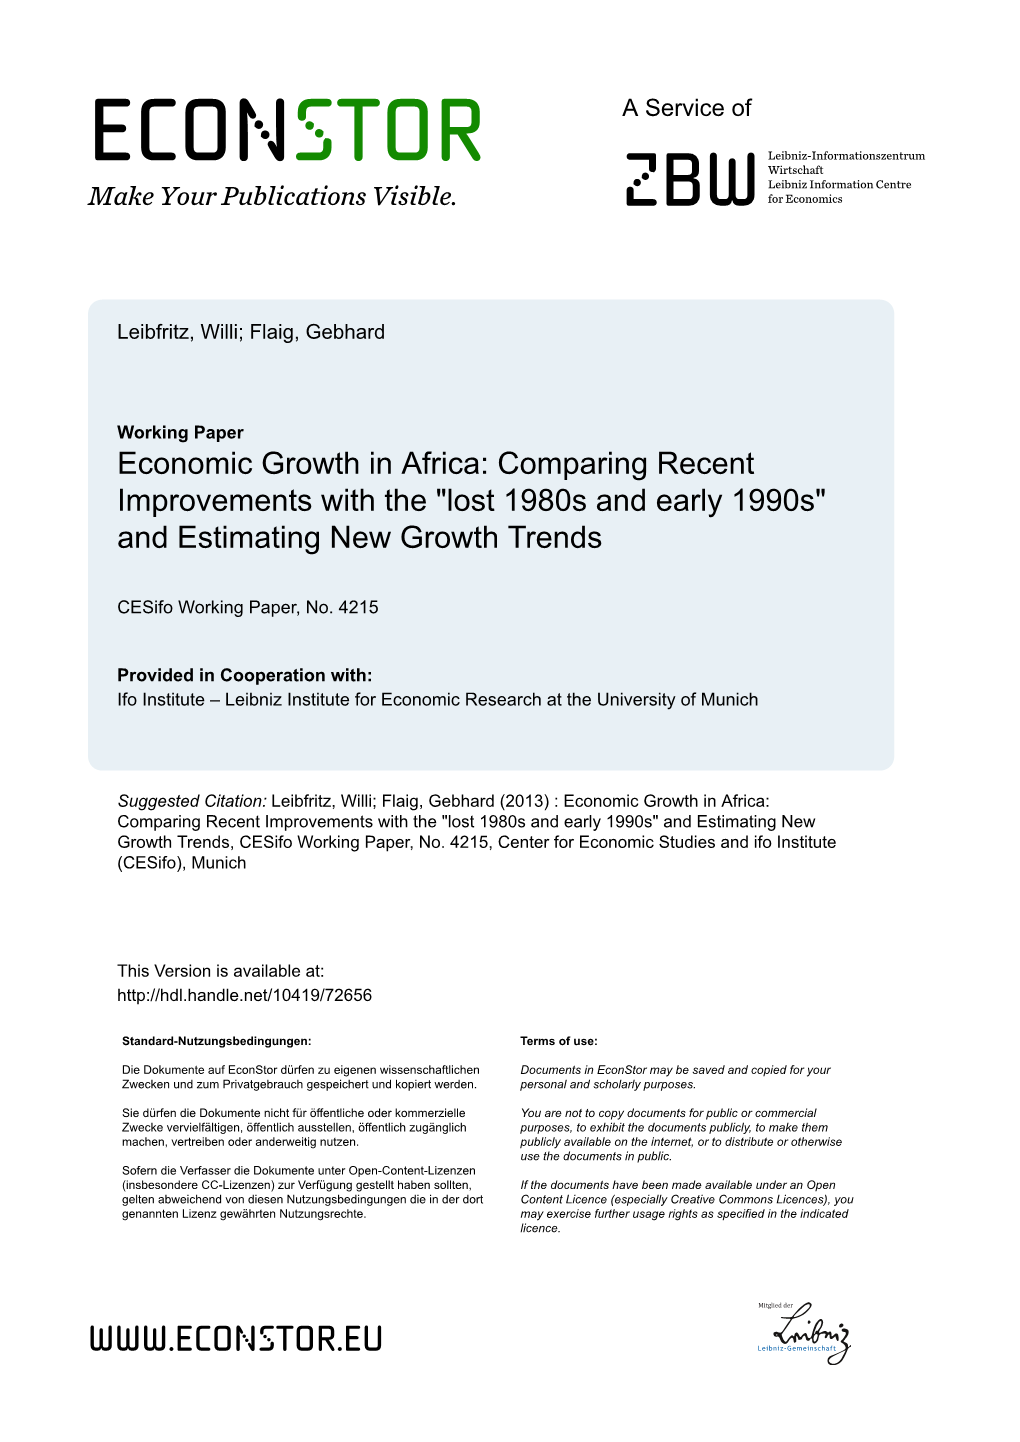 Cesifo Working Paper No. 4215 Category 6: Fiscal Policy, Macroeconomics and Growth April 2013